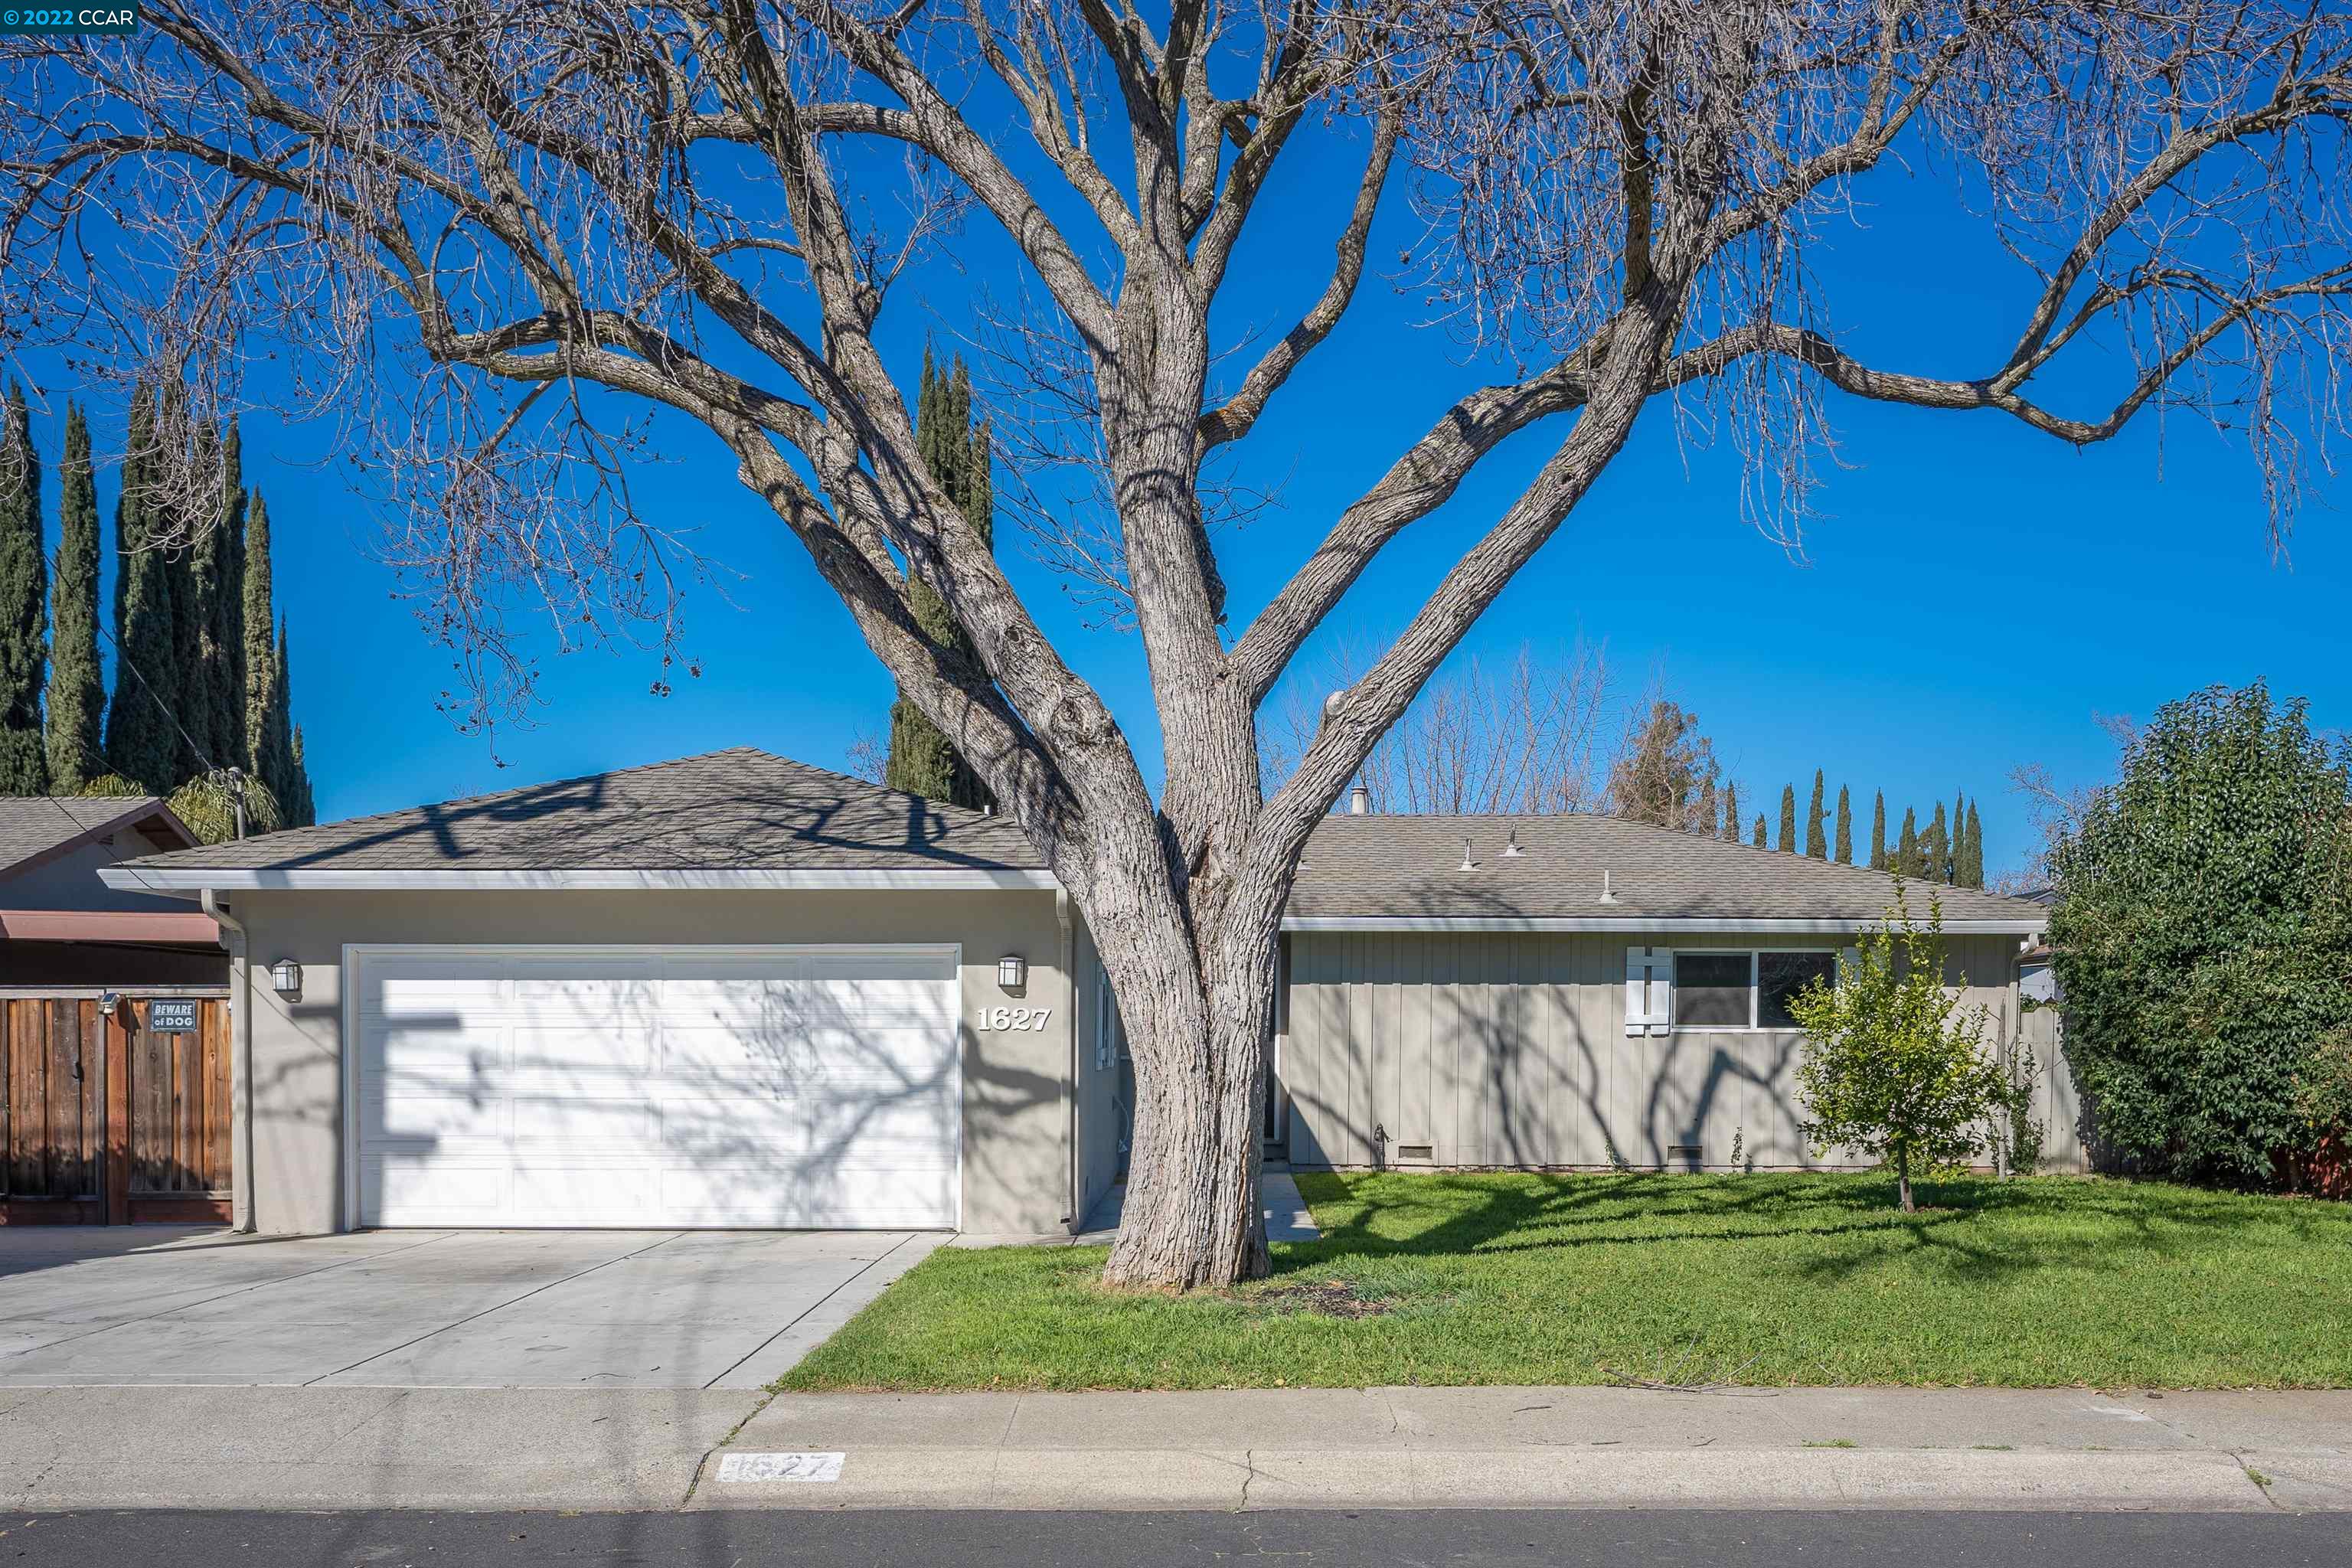 Photo of 1627 Olympia St in Concord, CA